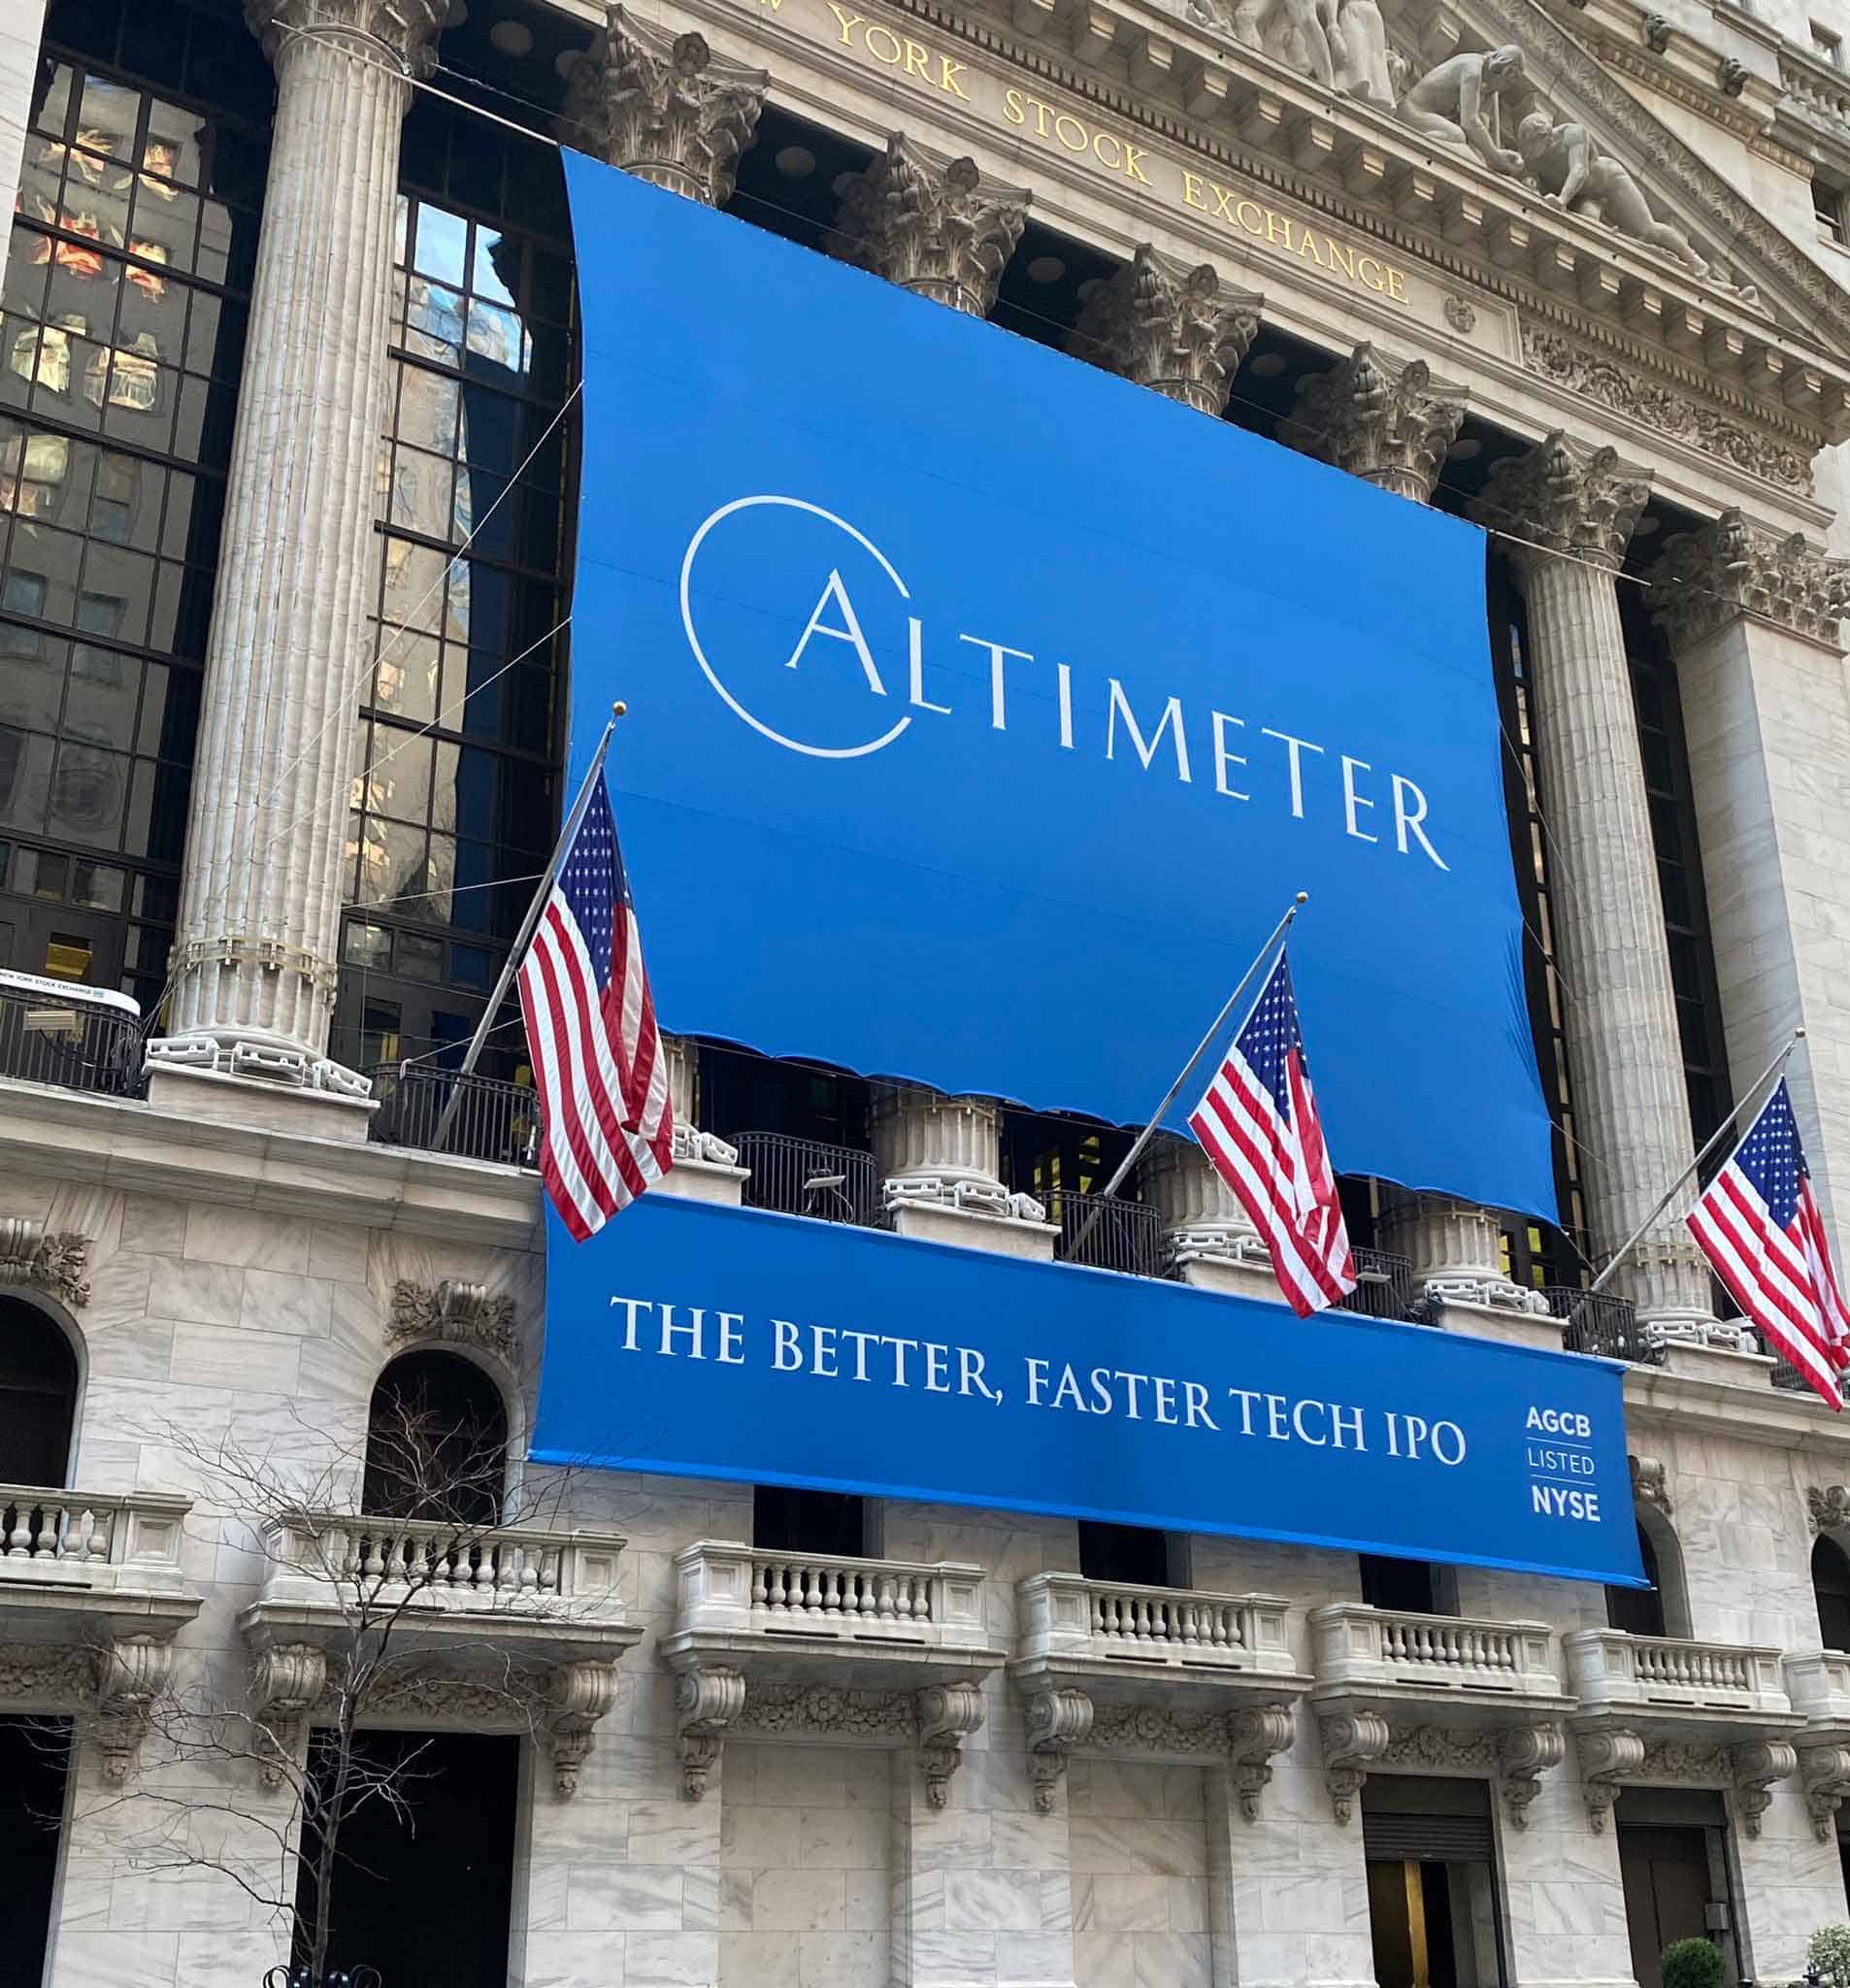 National Flag and Display produces the Custom Banners at the New York Stock Exchange for the Initial Public Offering of Altimeter.